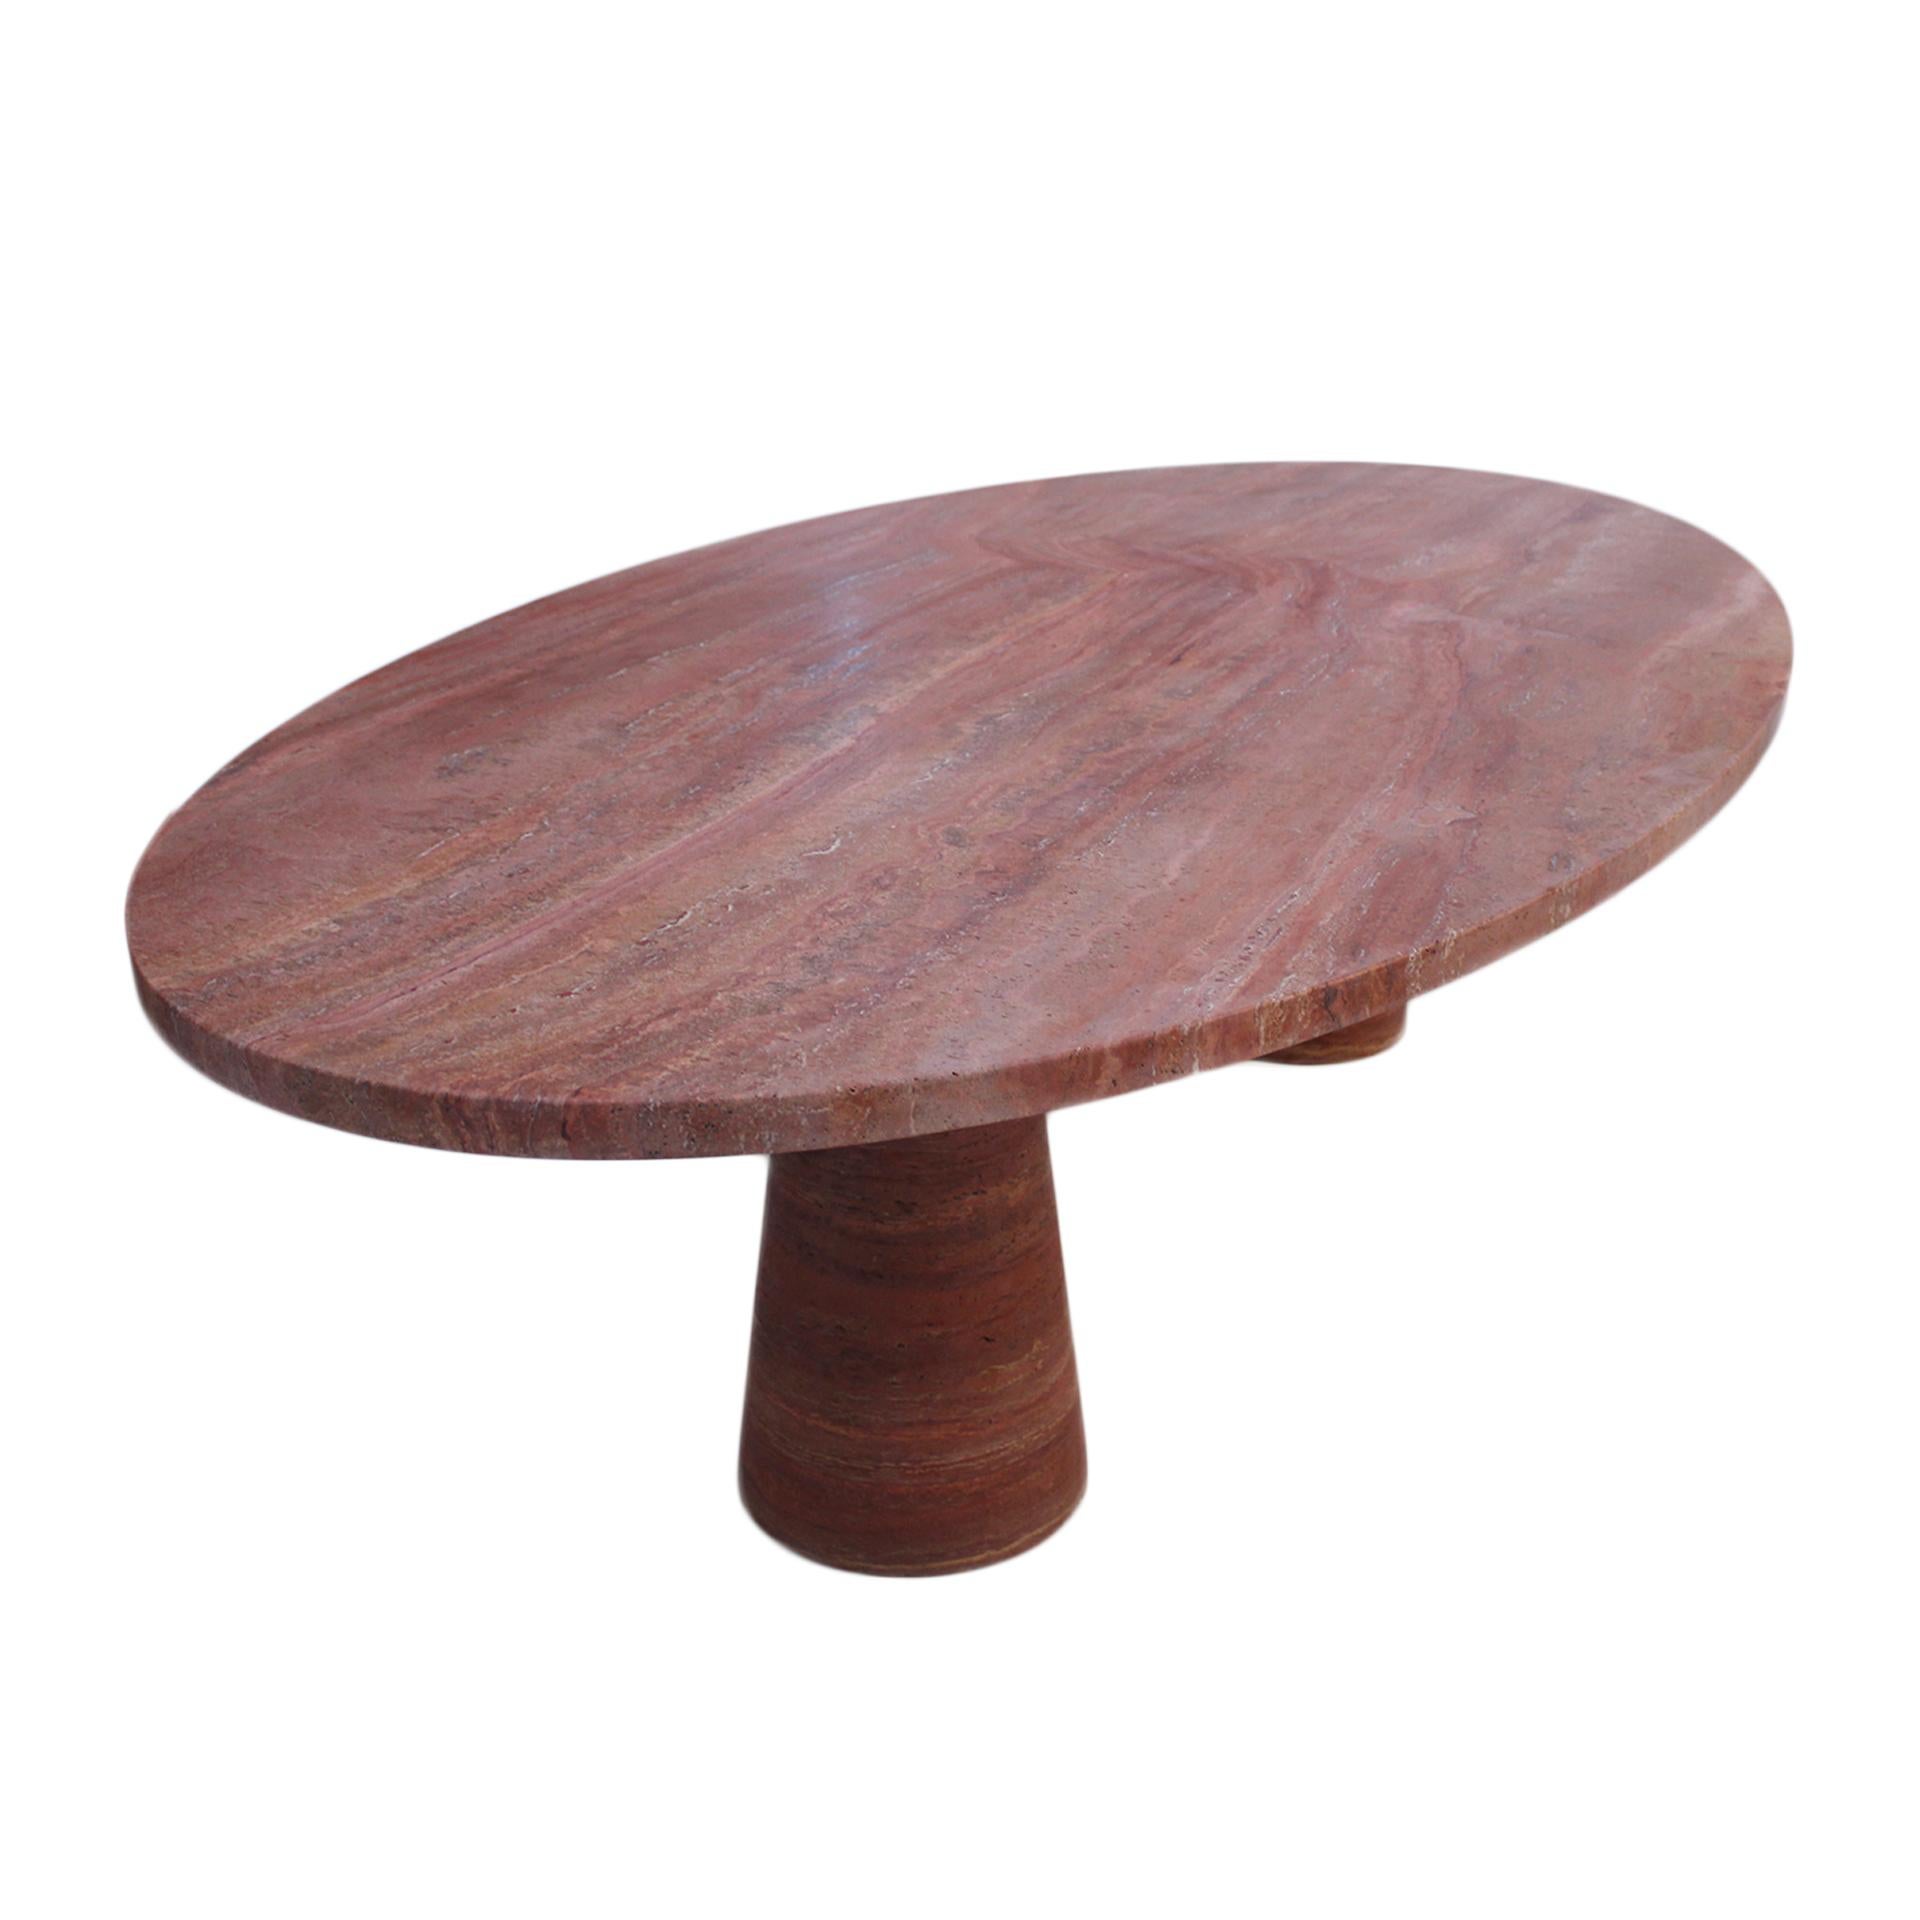 Italian Red Marble Persa Dining Table with Oval Top and Rounded Solid Legs For Sale 1